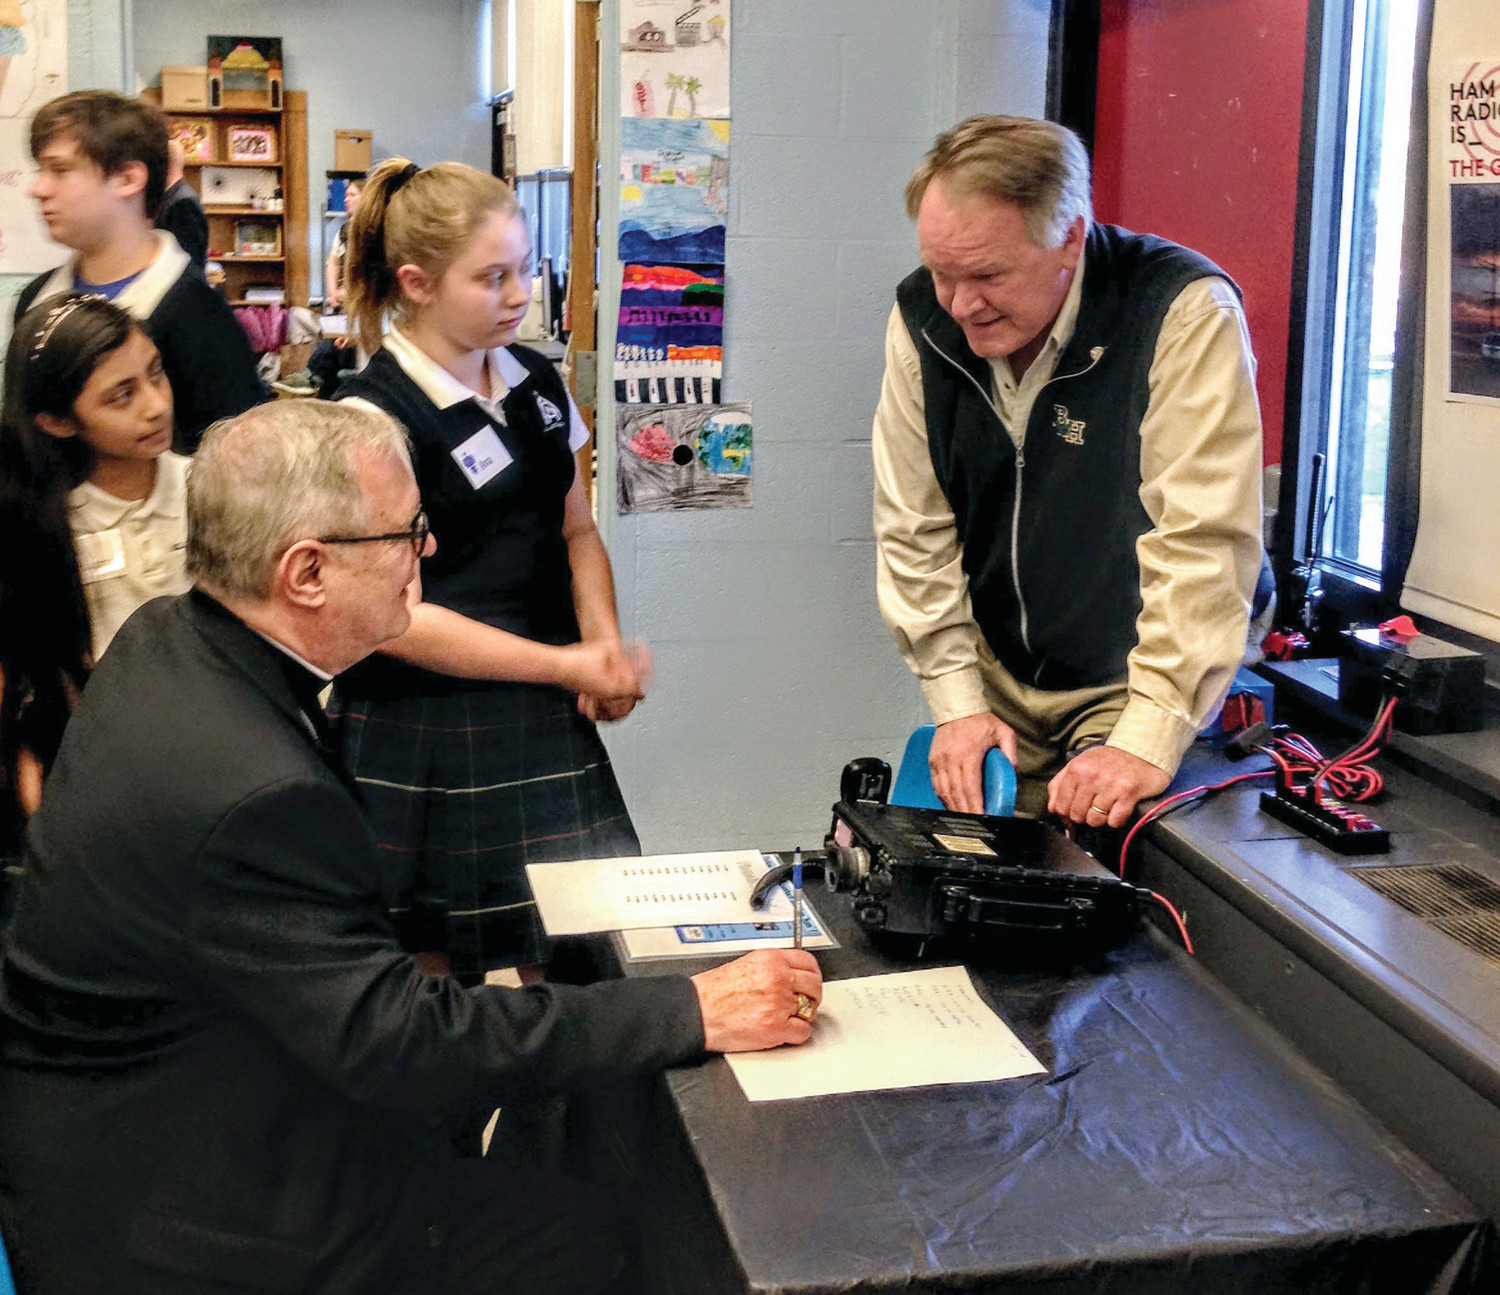 Bishop Thomas J. Tobin attends the annual STEAM Night and gets a pointer from Newport amateur radio/CyberPatriot coach Mike Cullen before getting on the air and seeing “communication resiliency” at work.  Students Arianna, left, and Ava stand ready to assist in making the contact.